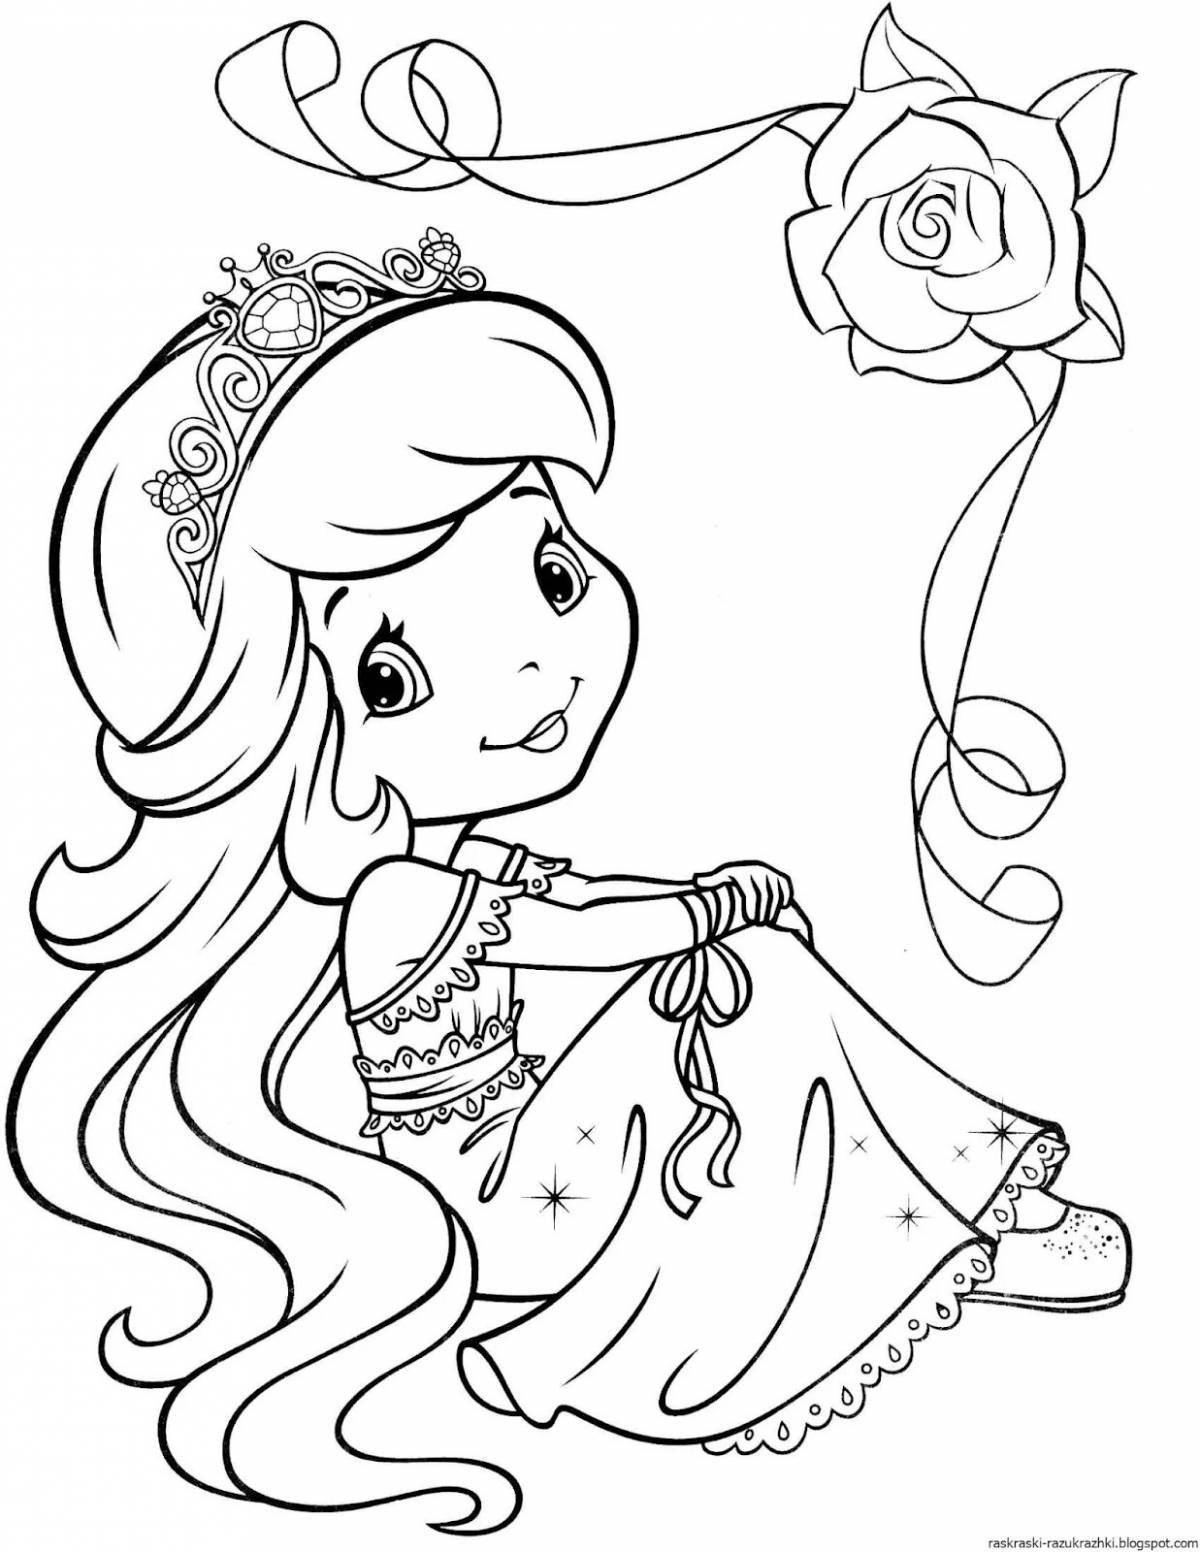 Cute princess coloring pages for girls 7 years old